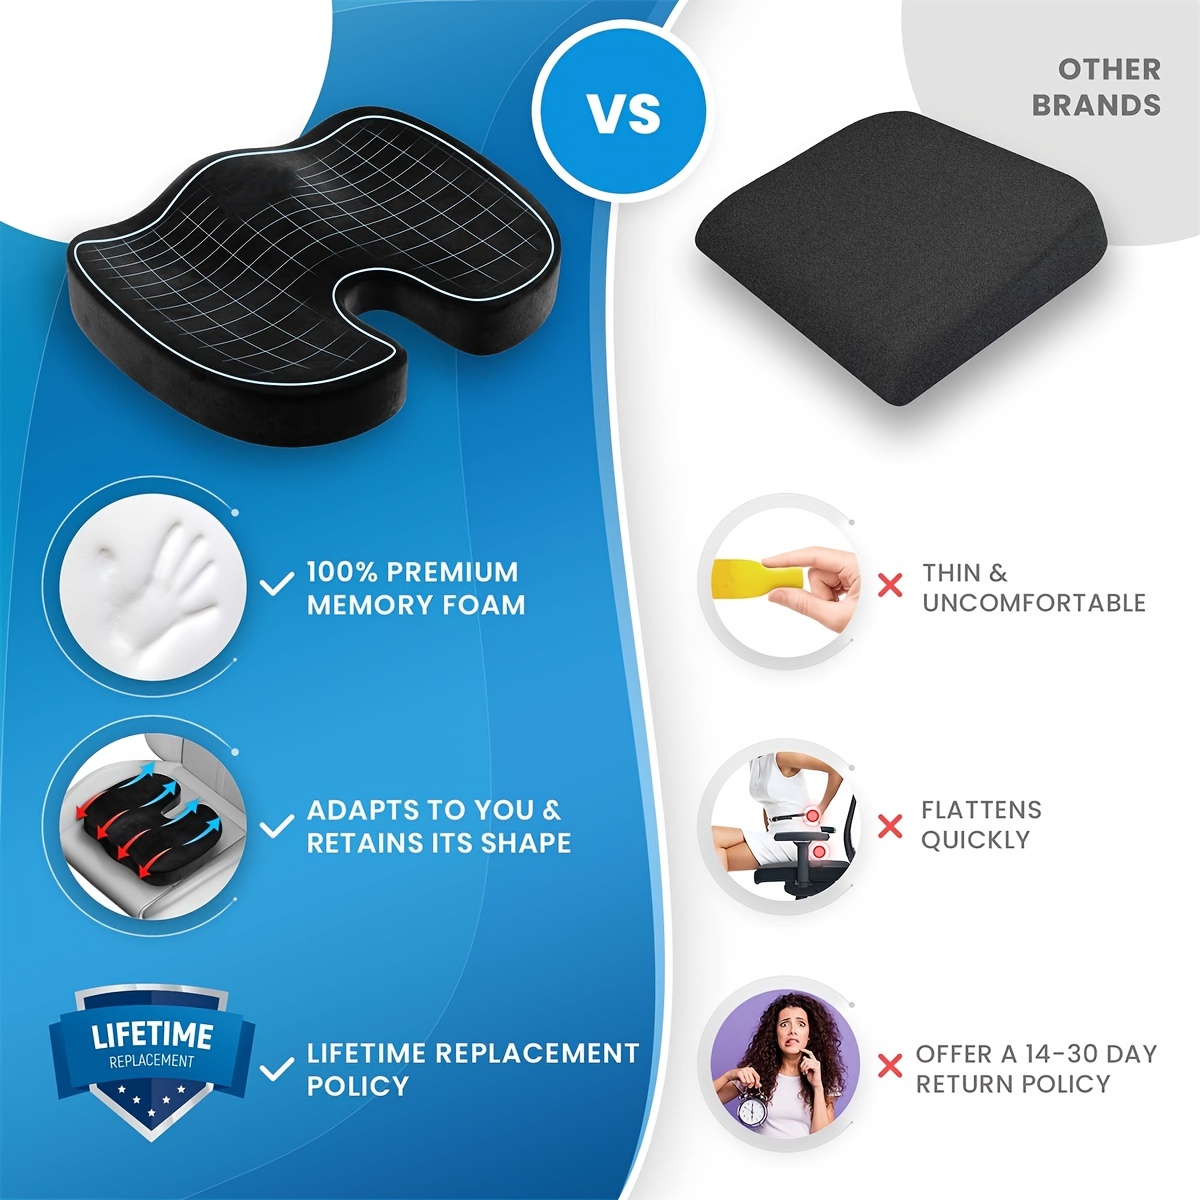 Waoaw Seat Cushion, Office Chair Cushions Butt Pillow for Long Sitting, Memory Foam Chair Pad for Back, Coccyx, Tailbone Pain Relief